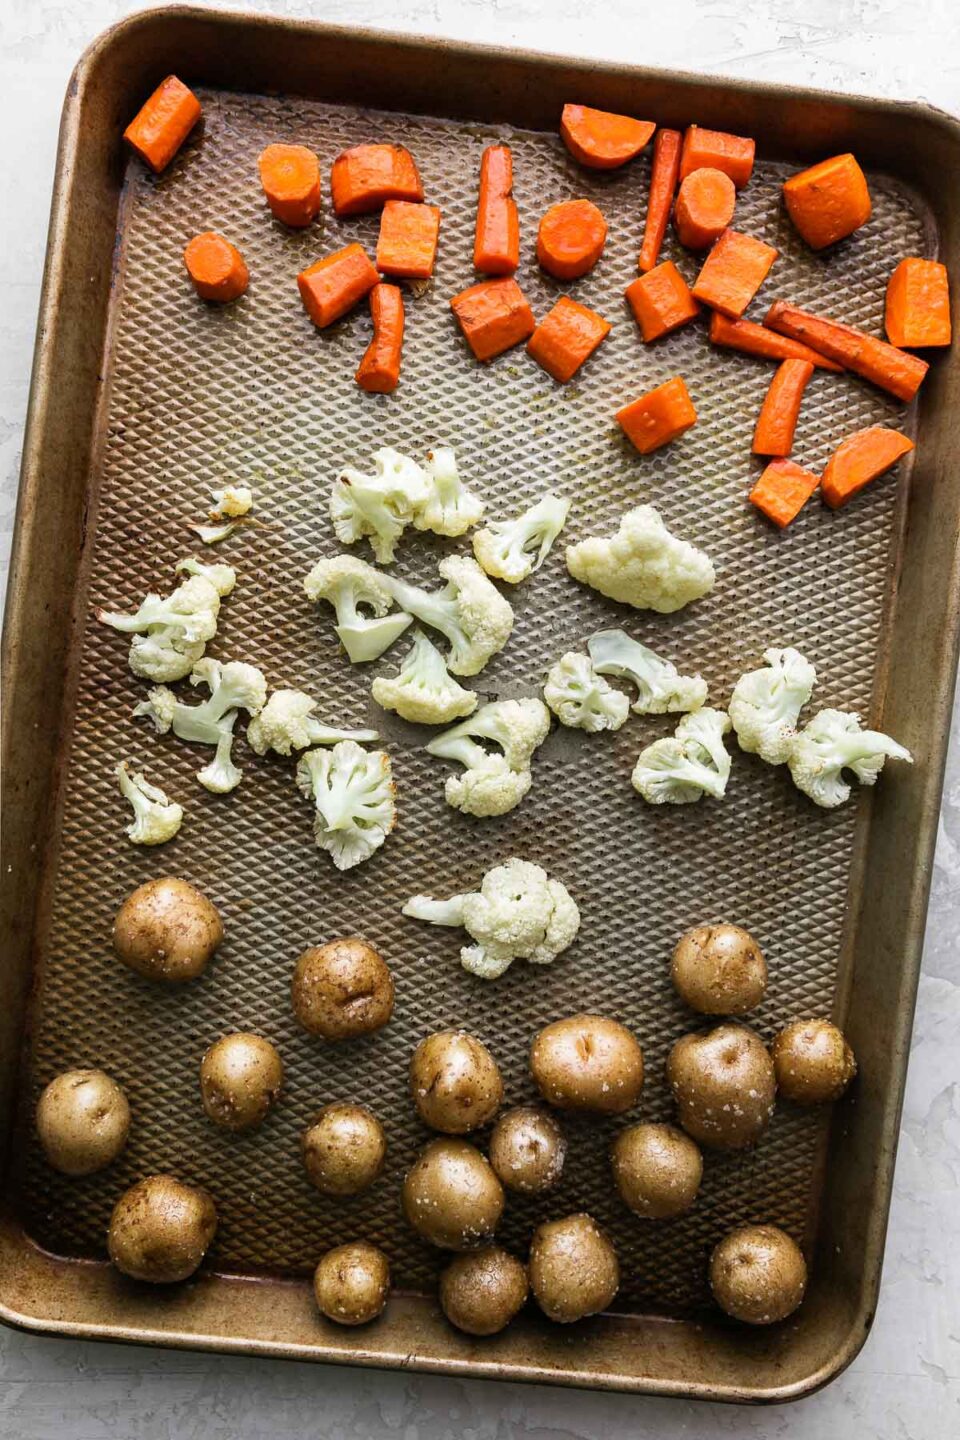 Carrots, baby potatoes, and cauliflower cut into bite-sized pieces arranged on a baking sheet for roasting. The baking sheet sits atop a creamy white textured surface.